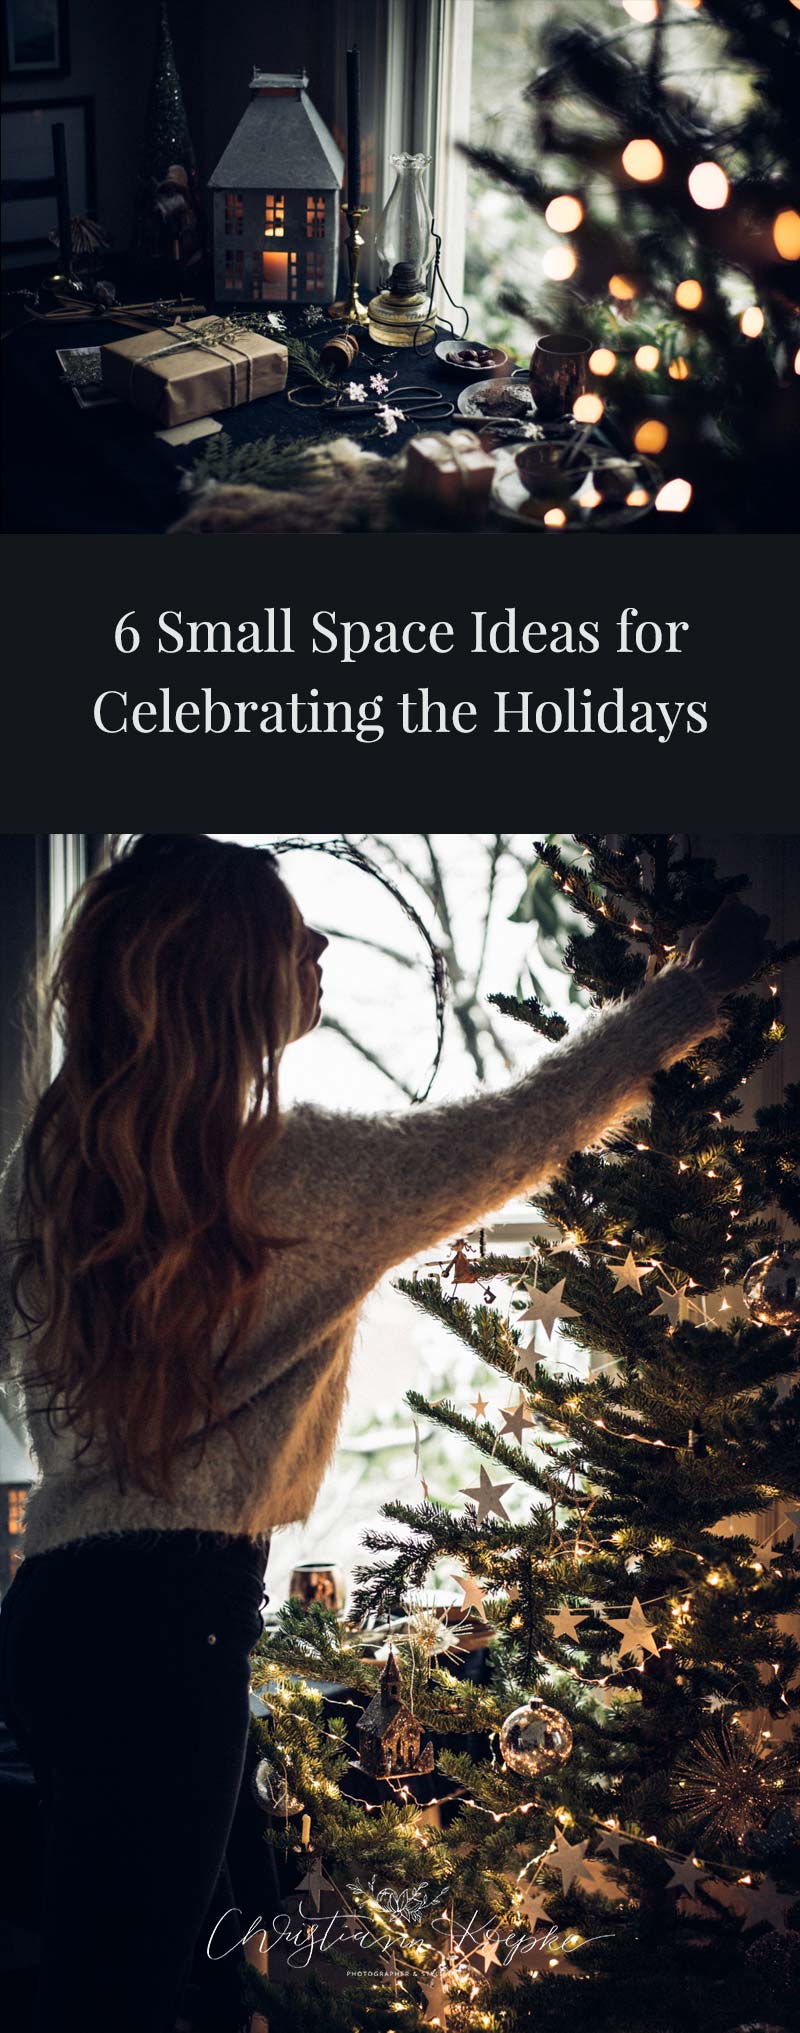 6 Small Space Ideas for Celebrating the Holidays | Christiann Koepke